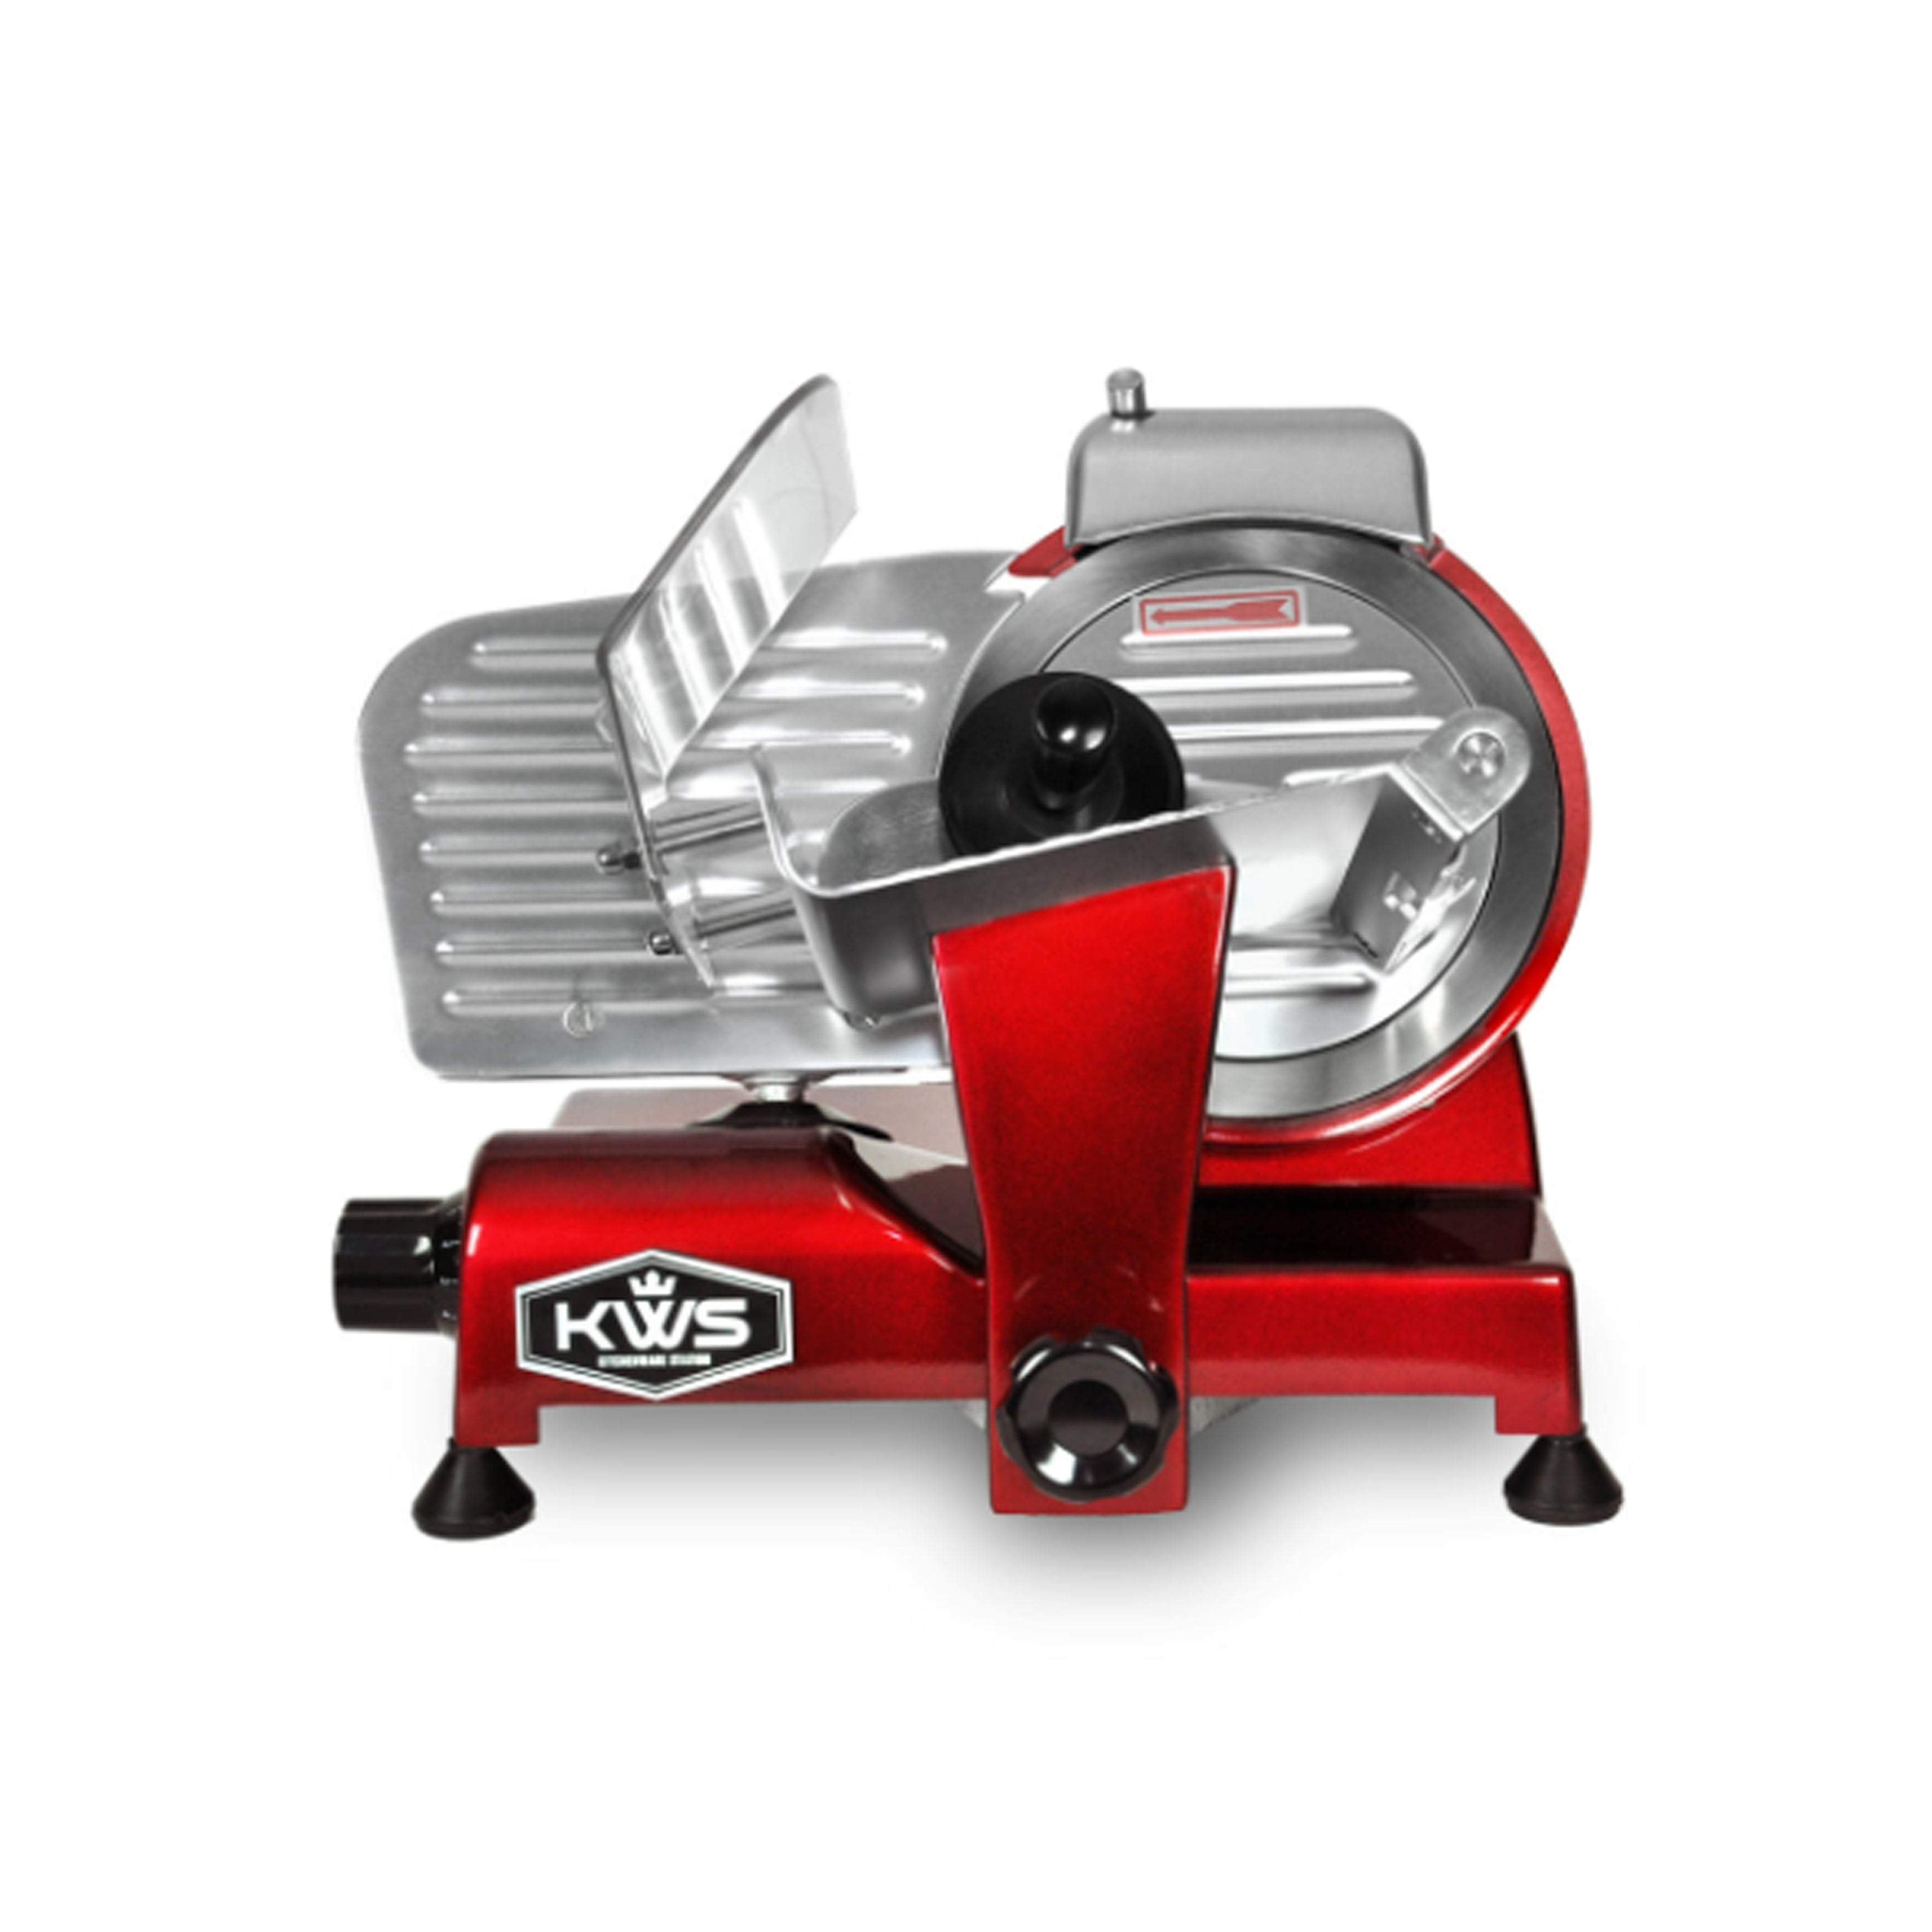 KWS - MS-6RS, Commercial 7.67″ Meat Slicer (Red Base) with Stainless Steel Blade